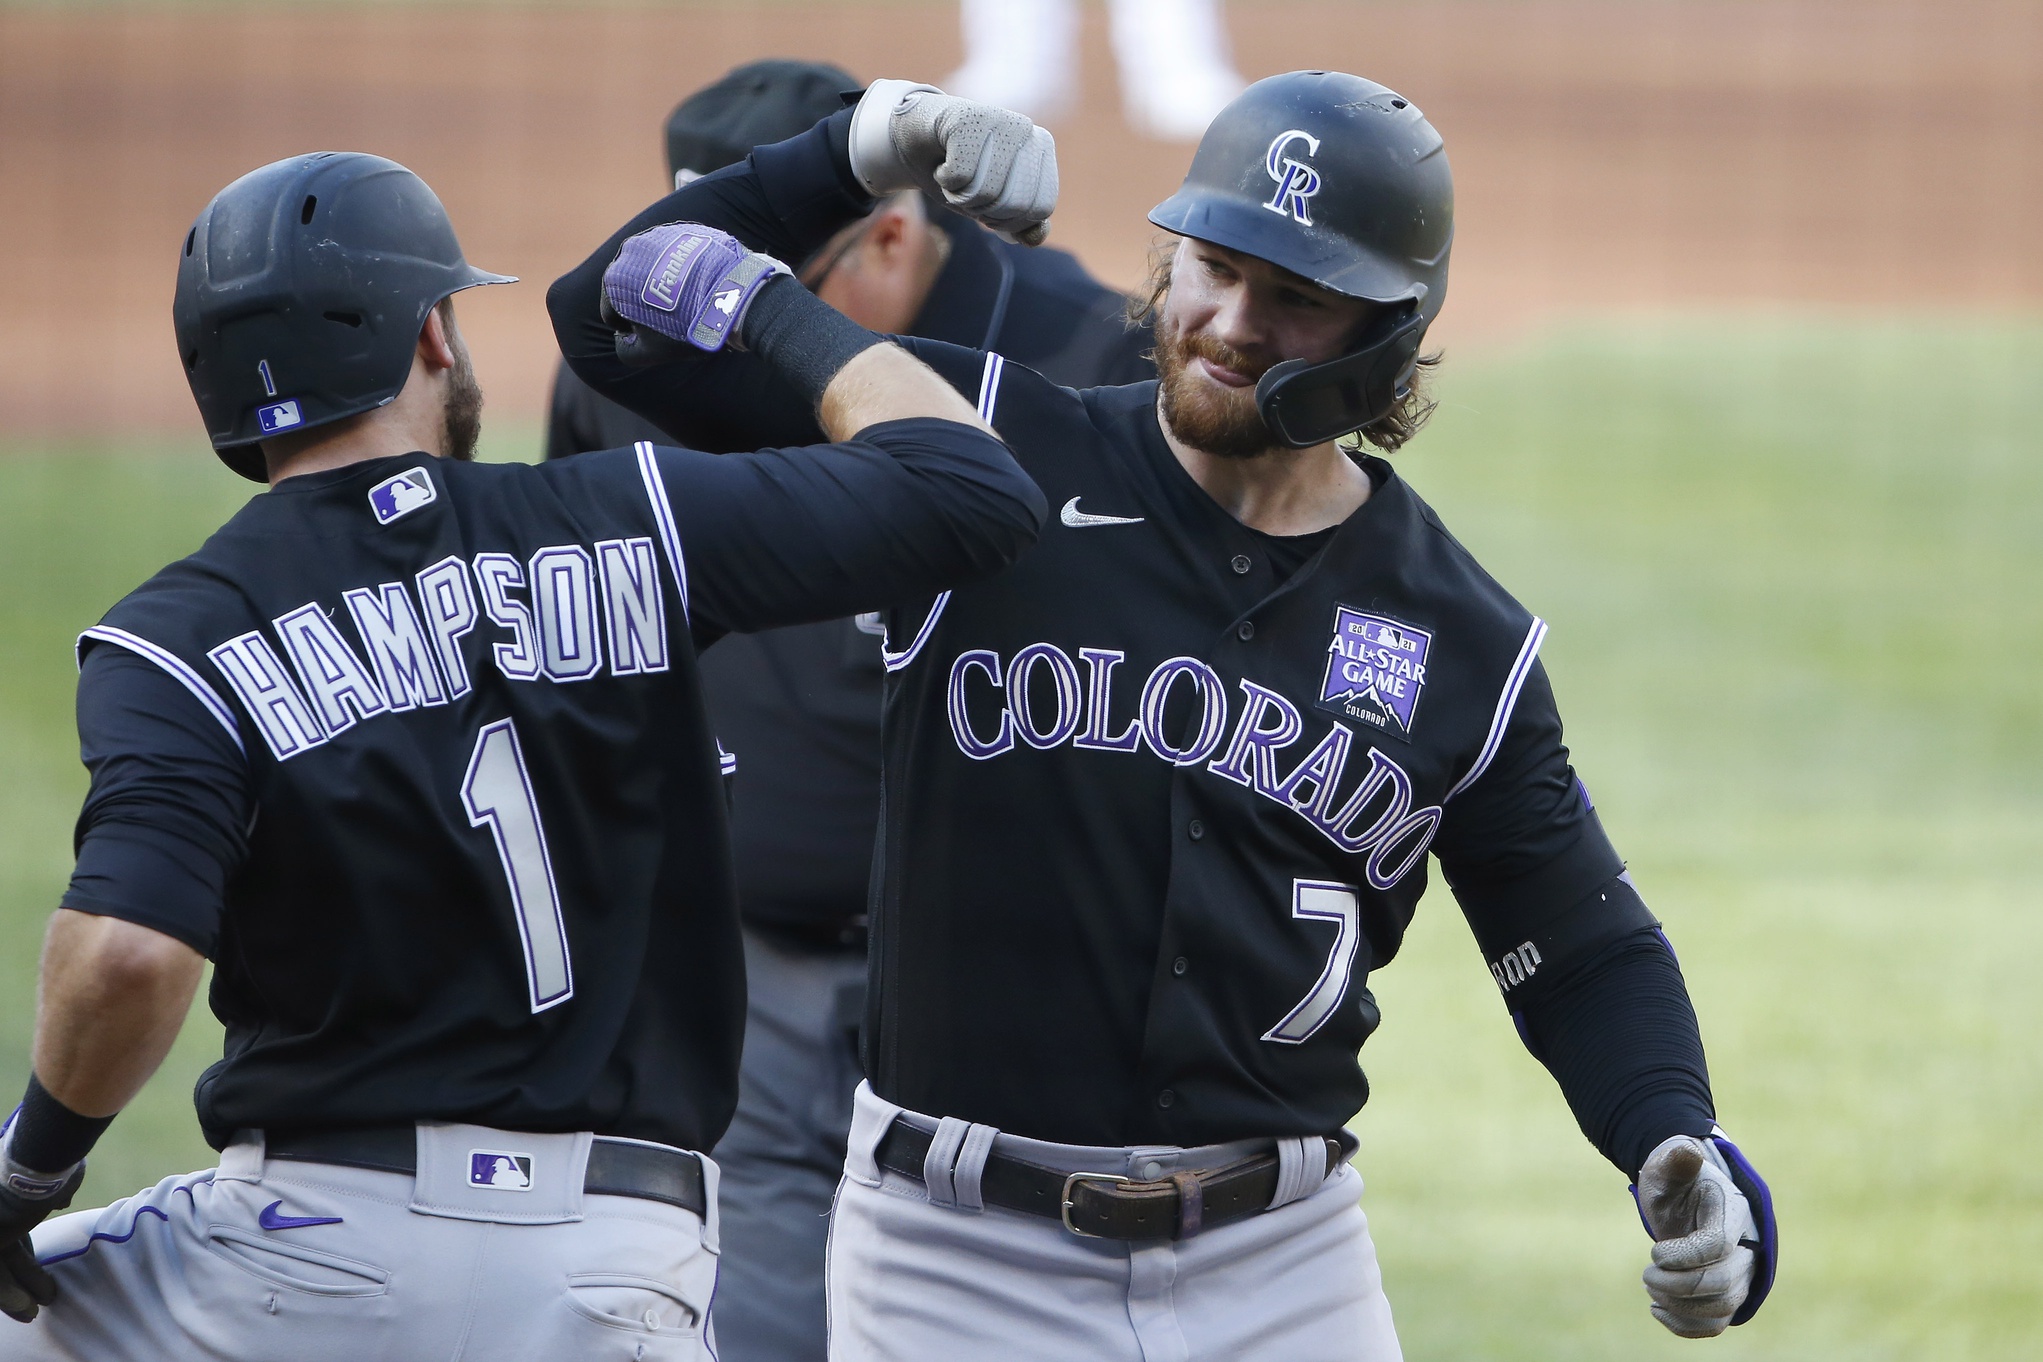 Colorado Rockies vs. Dodgers: When is Opening Day 2022?